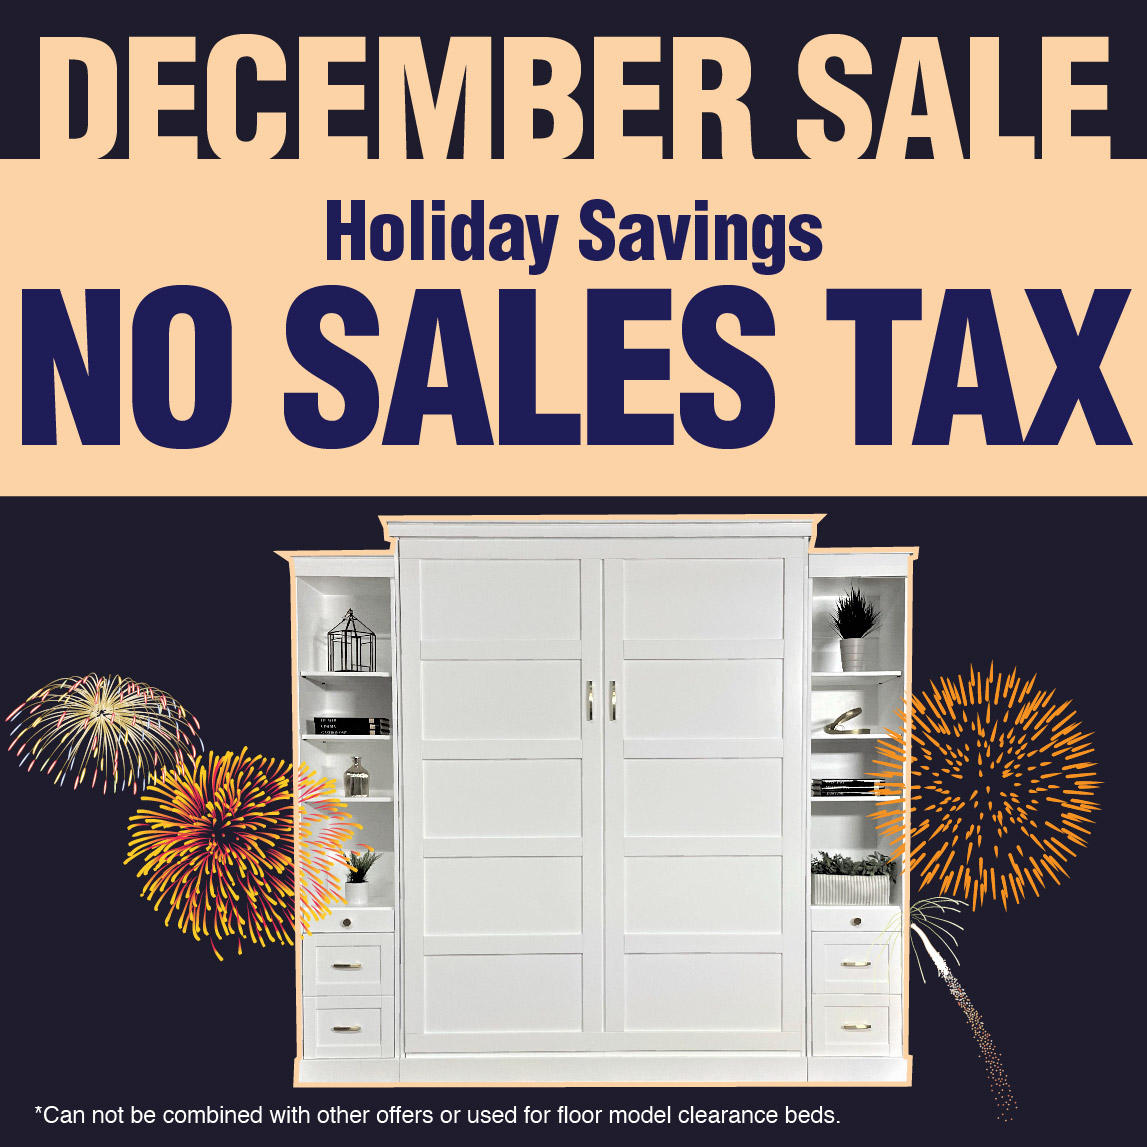 Purchase your Wall Bed or Murphy Bed from us in December 2022, and we will pay the sales tax!